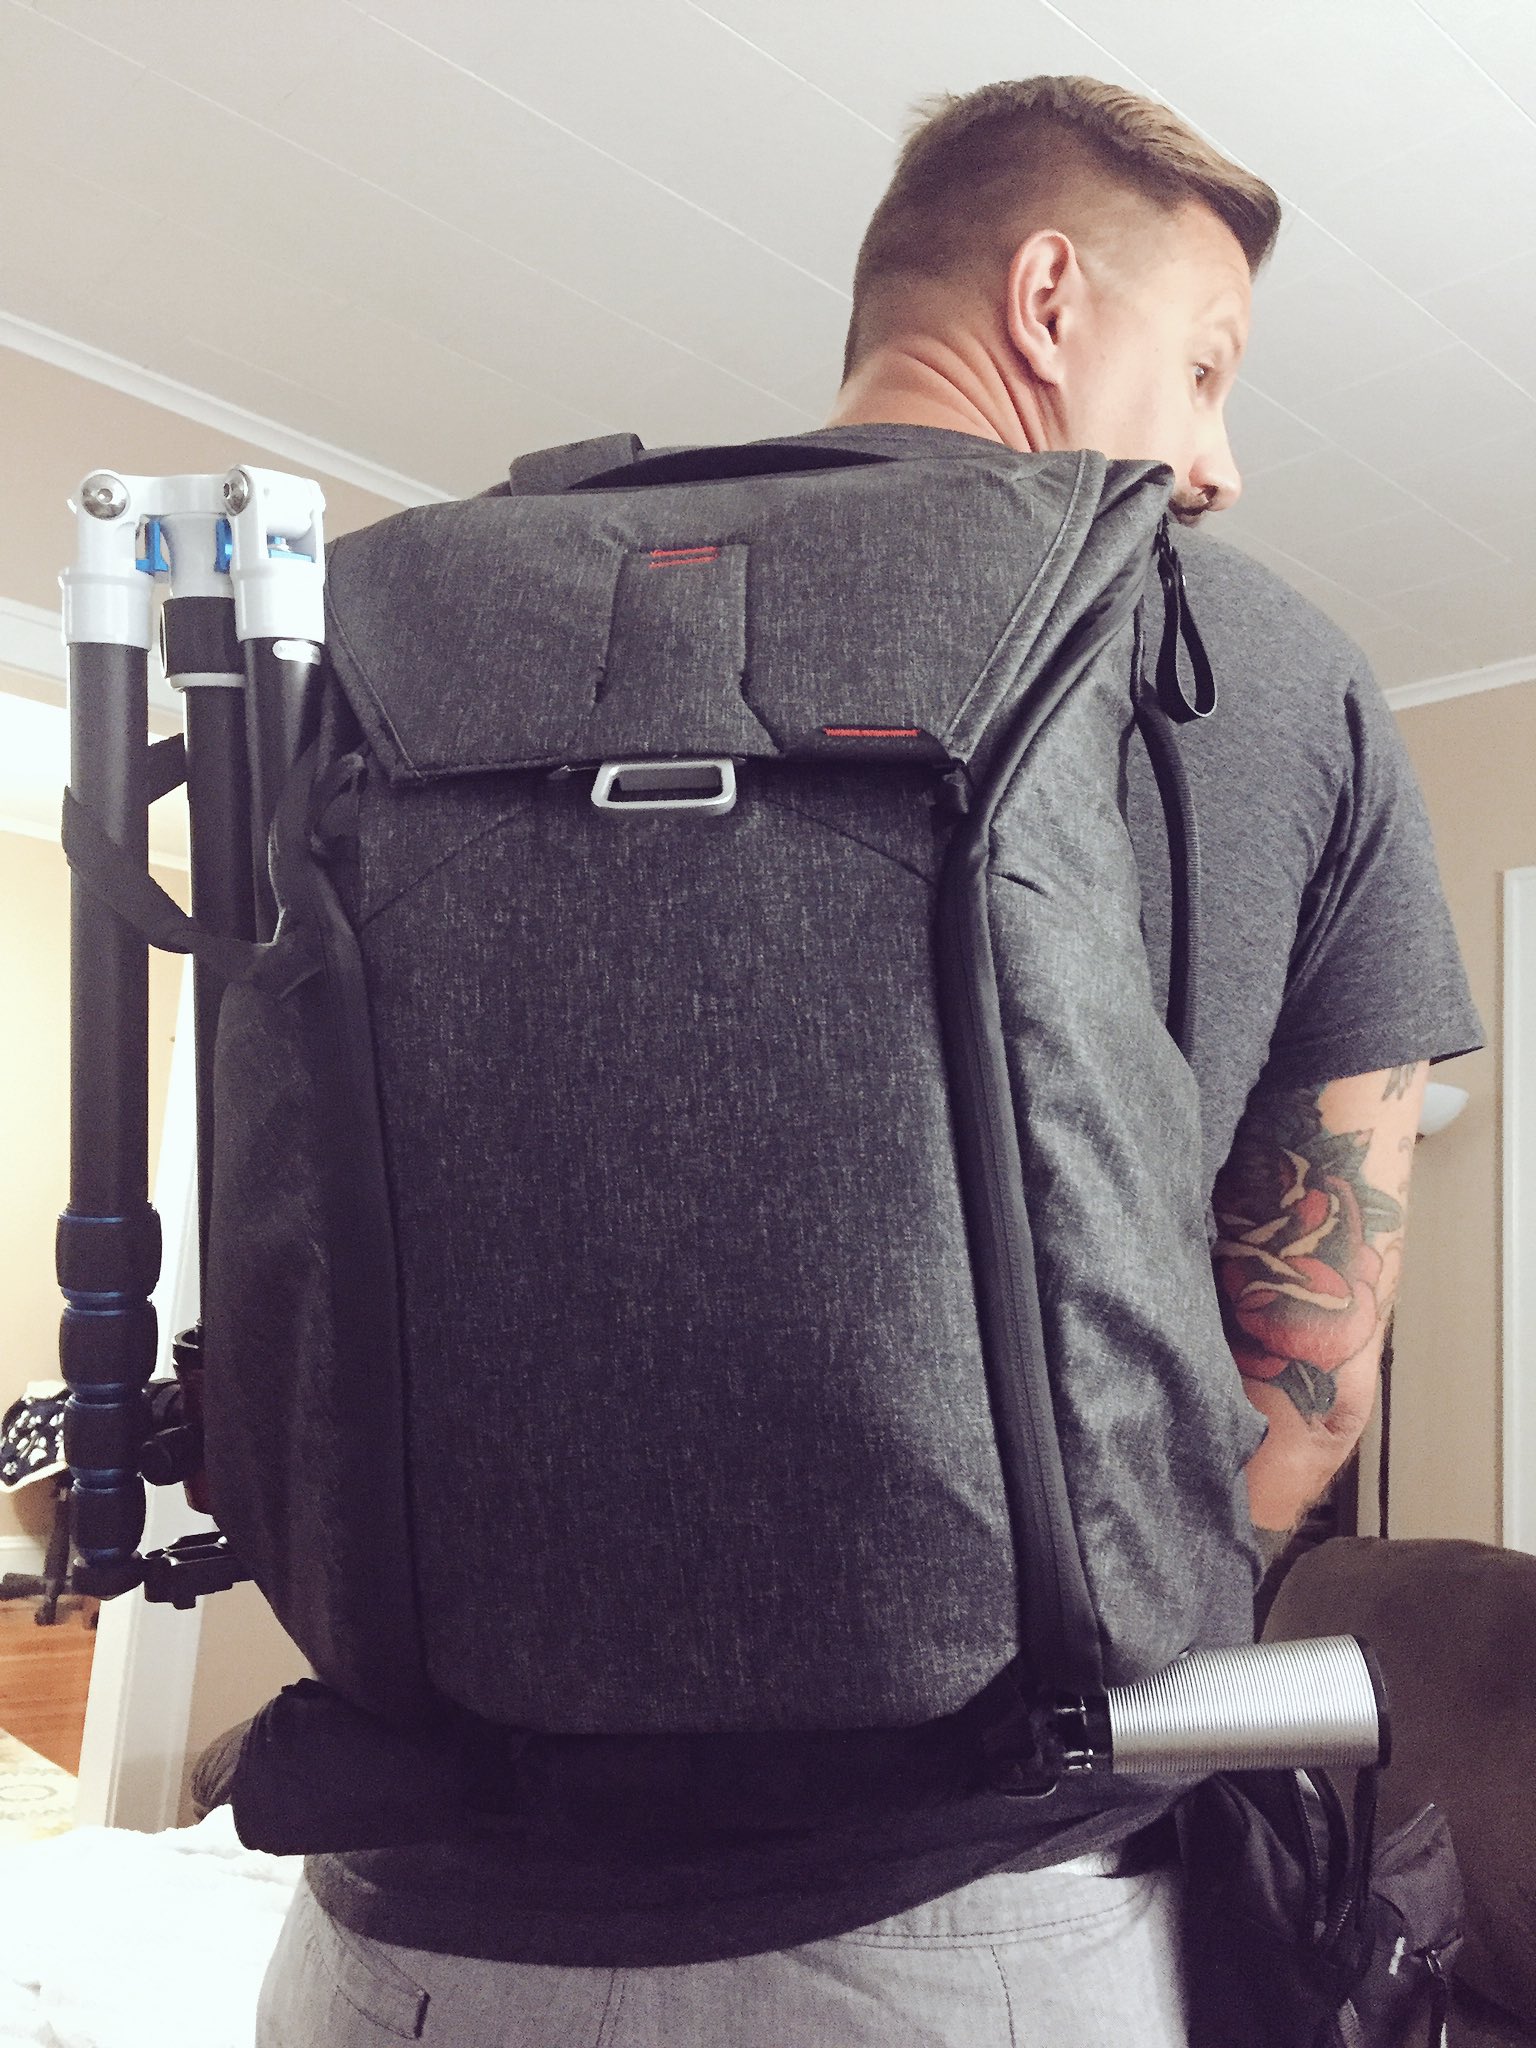 Jenn Tracker On Twitter Tim S New Camera Gear Backpack Came In The